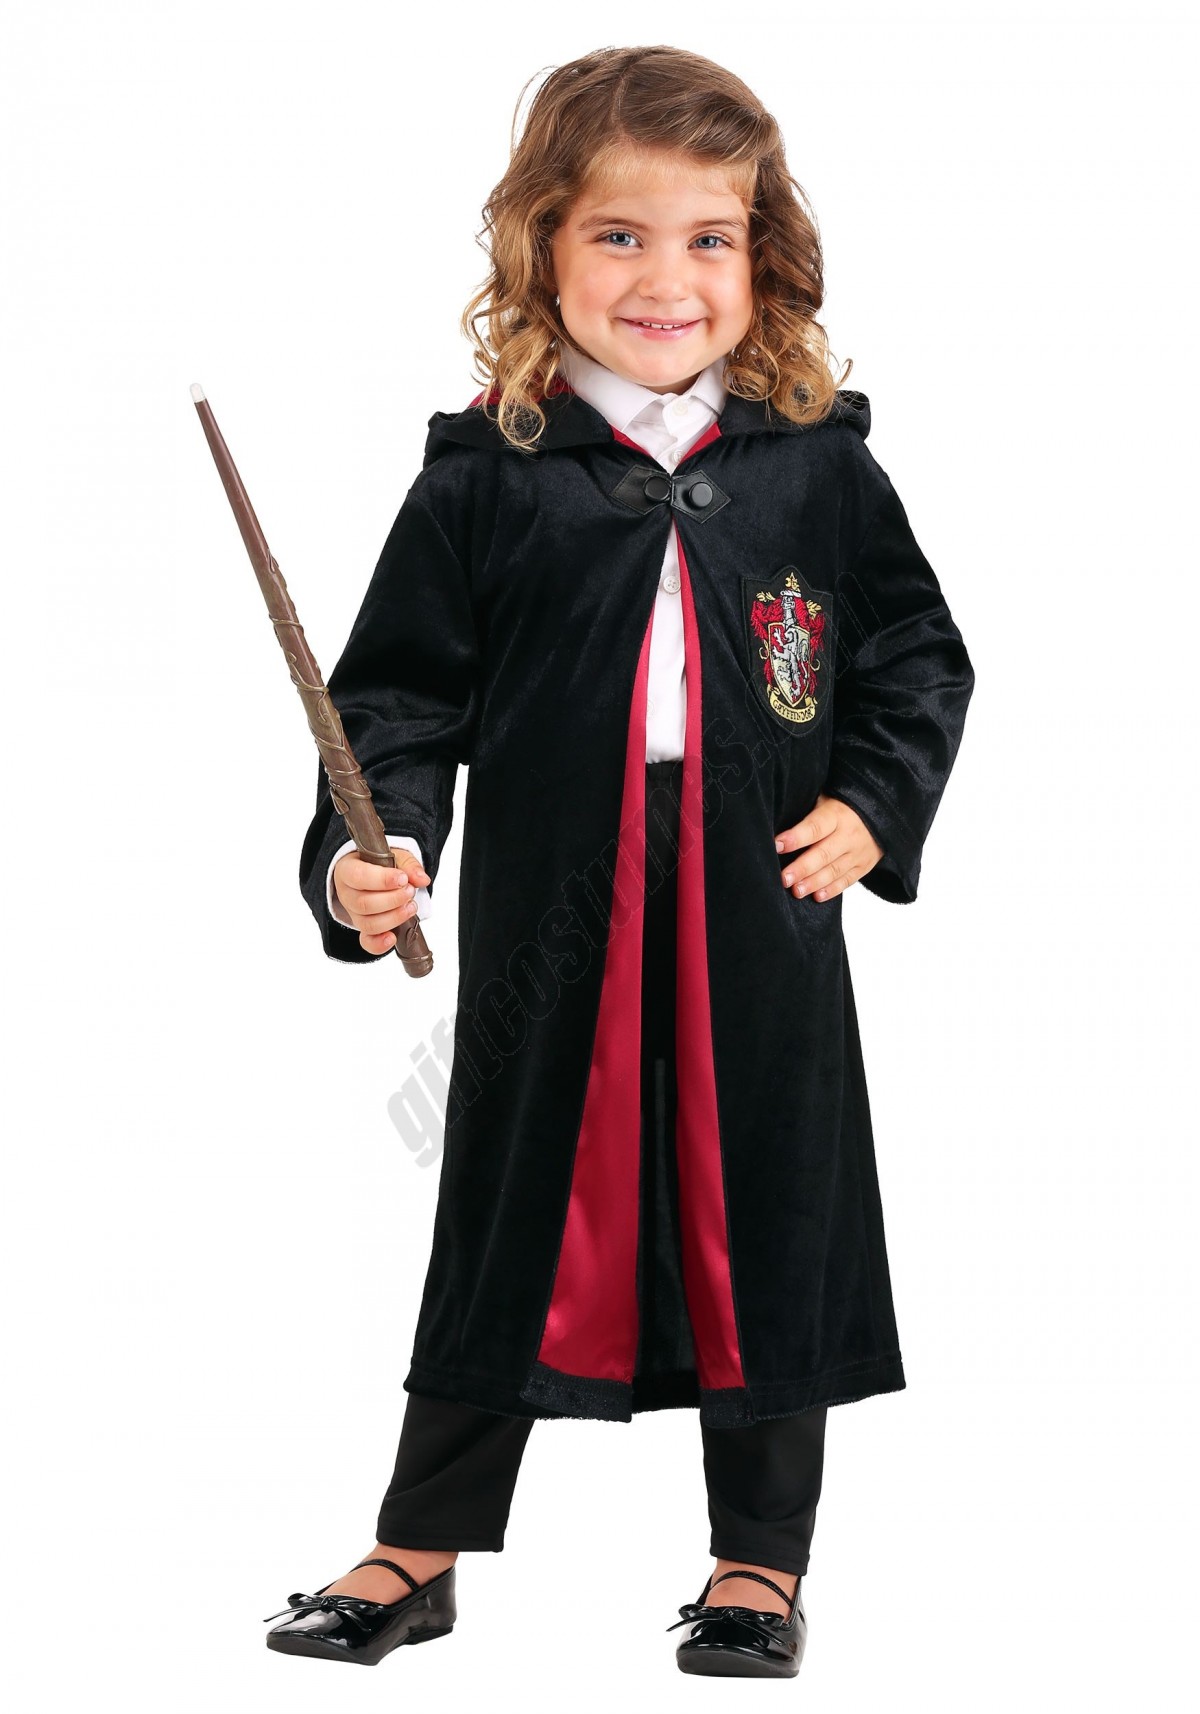 Harry Potter Toddler's Deluxe Gryffindor Robe Costume Promotions - -0